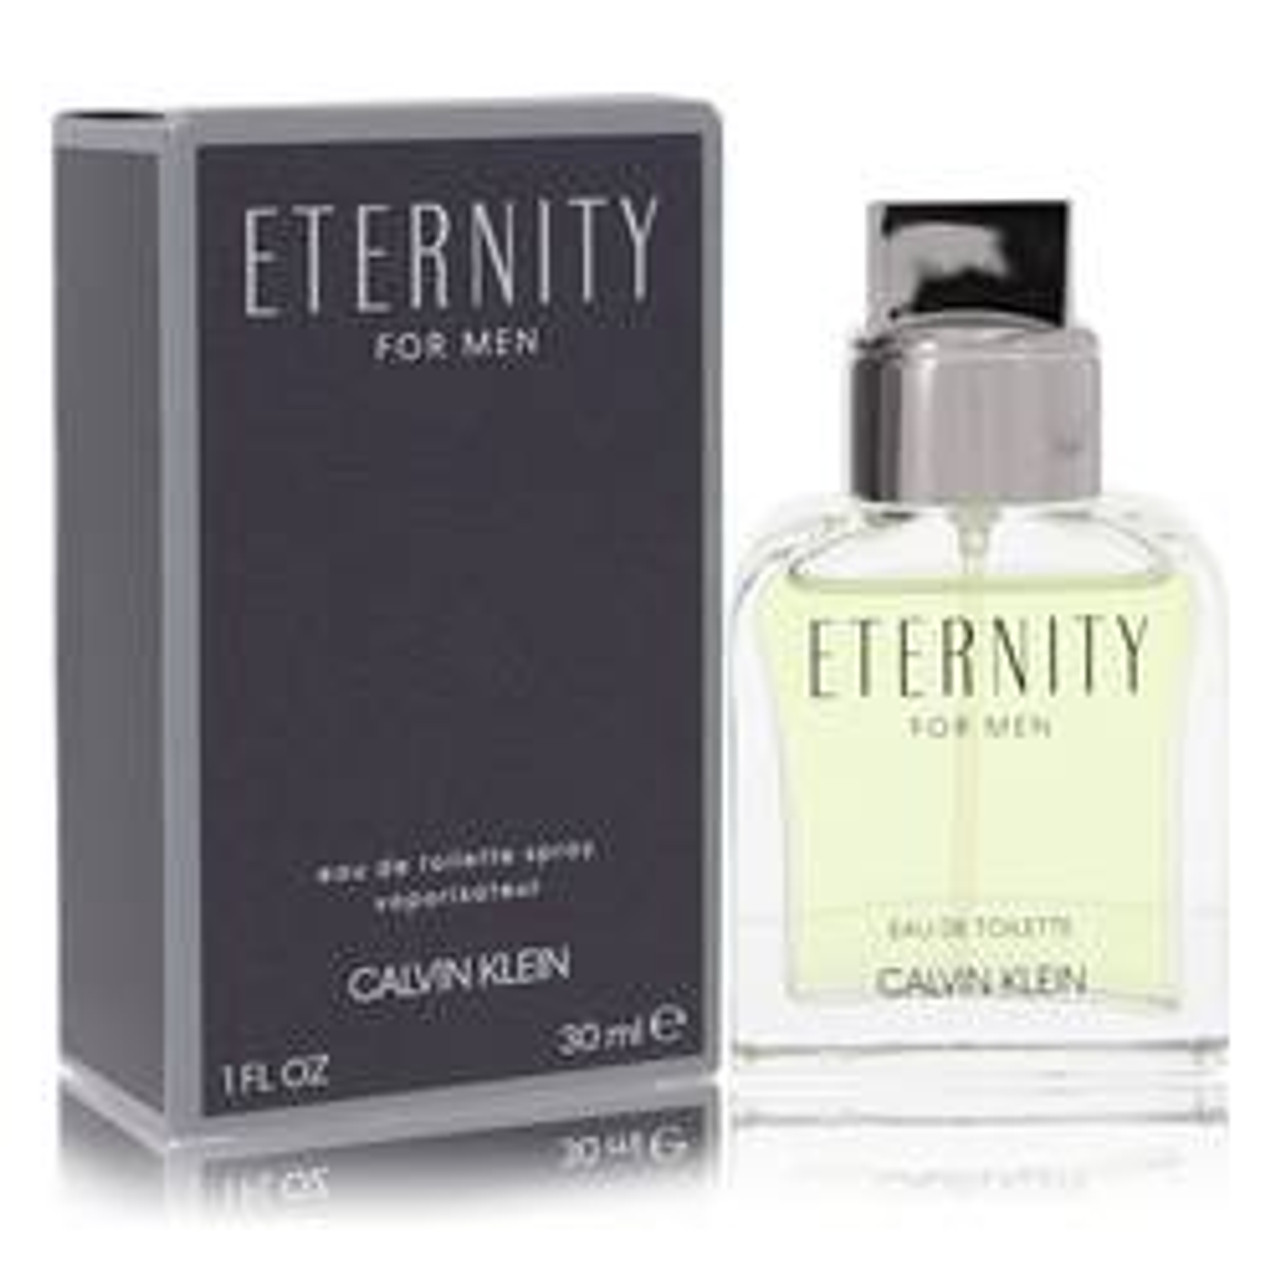 Eternity Cologne By Calvin Klein Eau De Toilette Spray 1 oz for Men - [From 75.00 - Choose pk Qty ] - *Ships from Miami